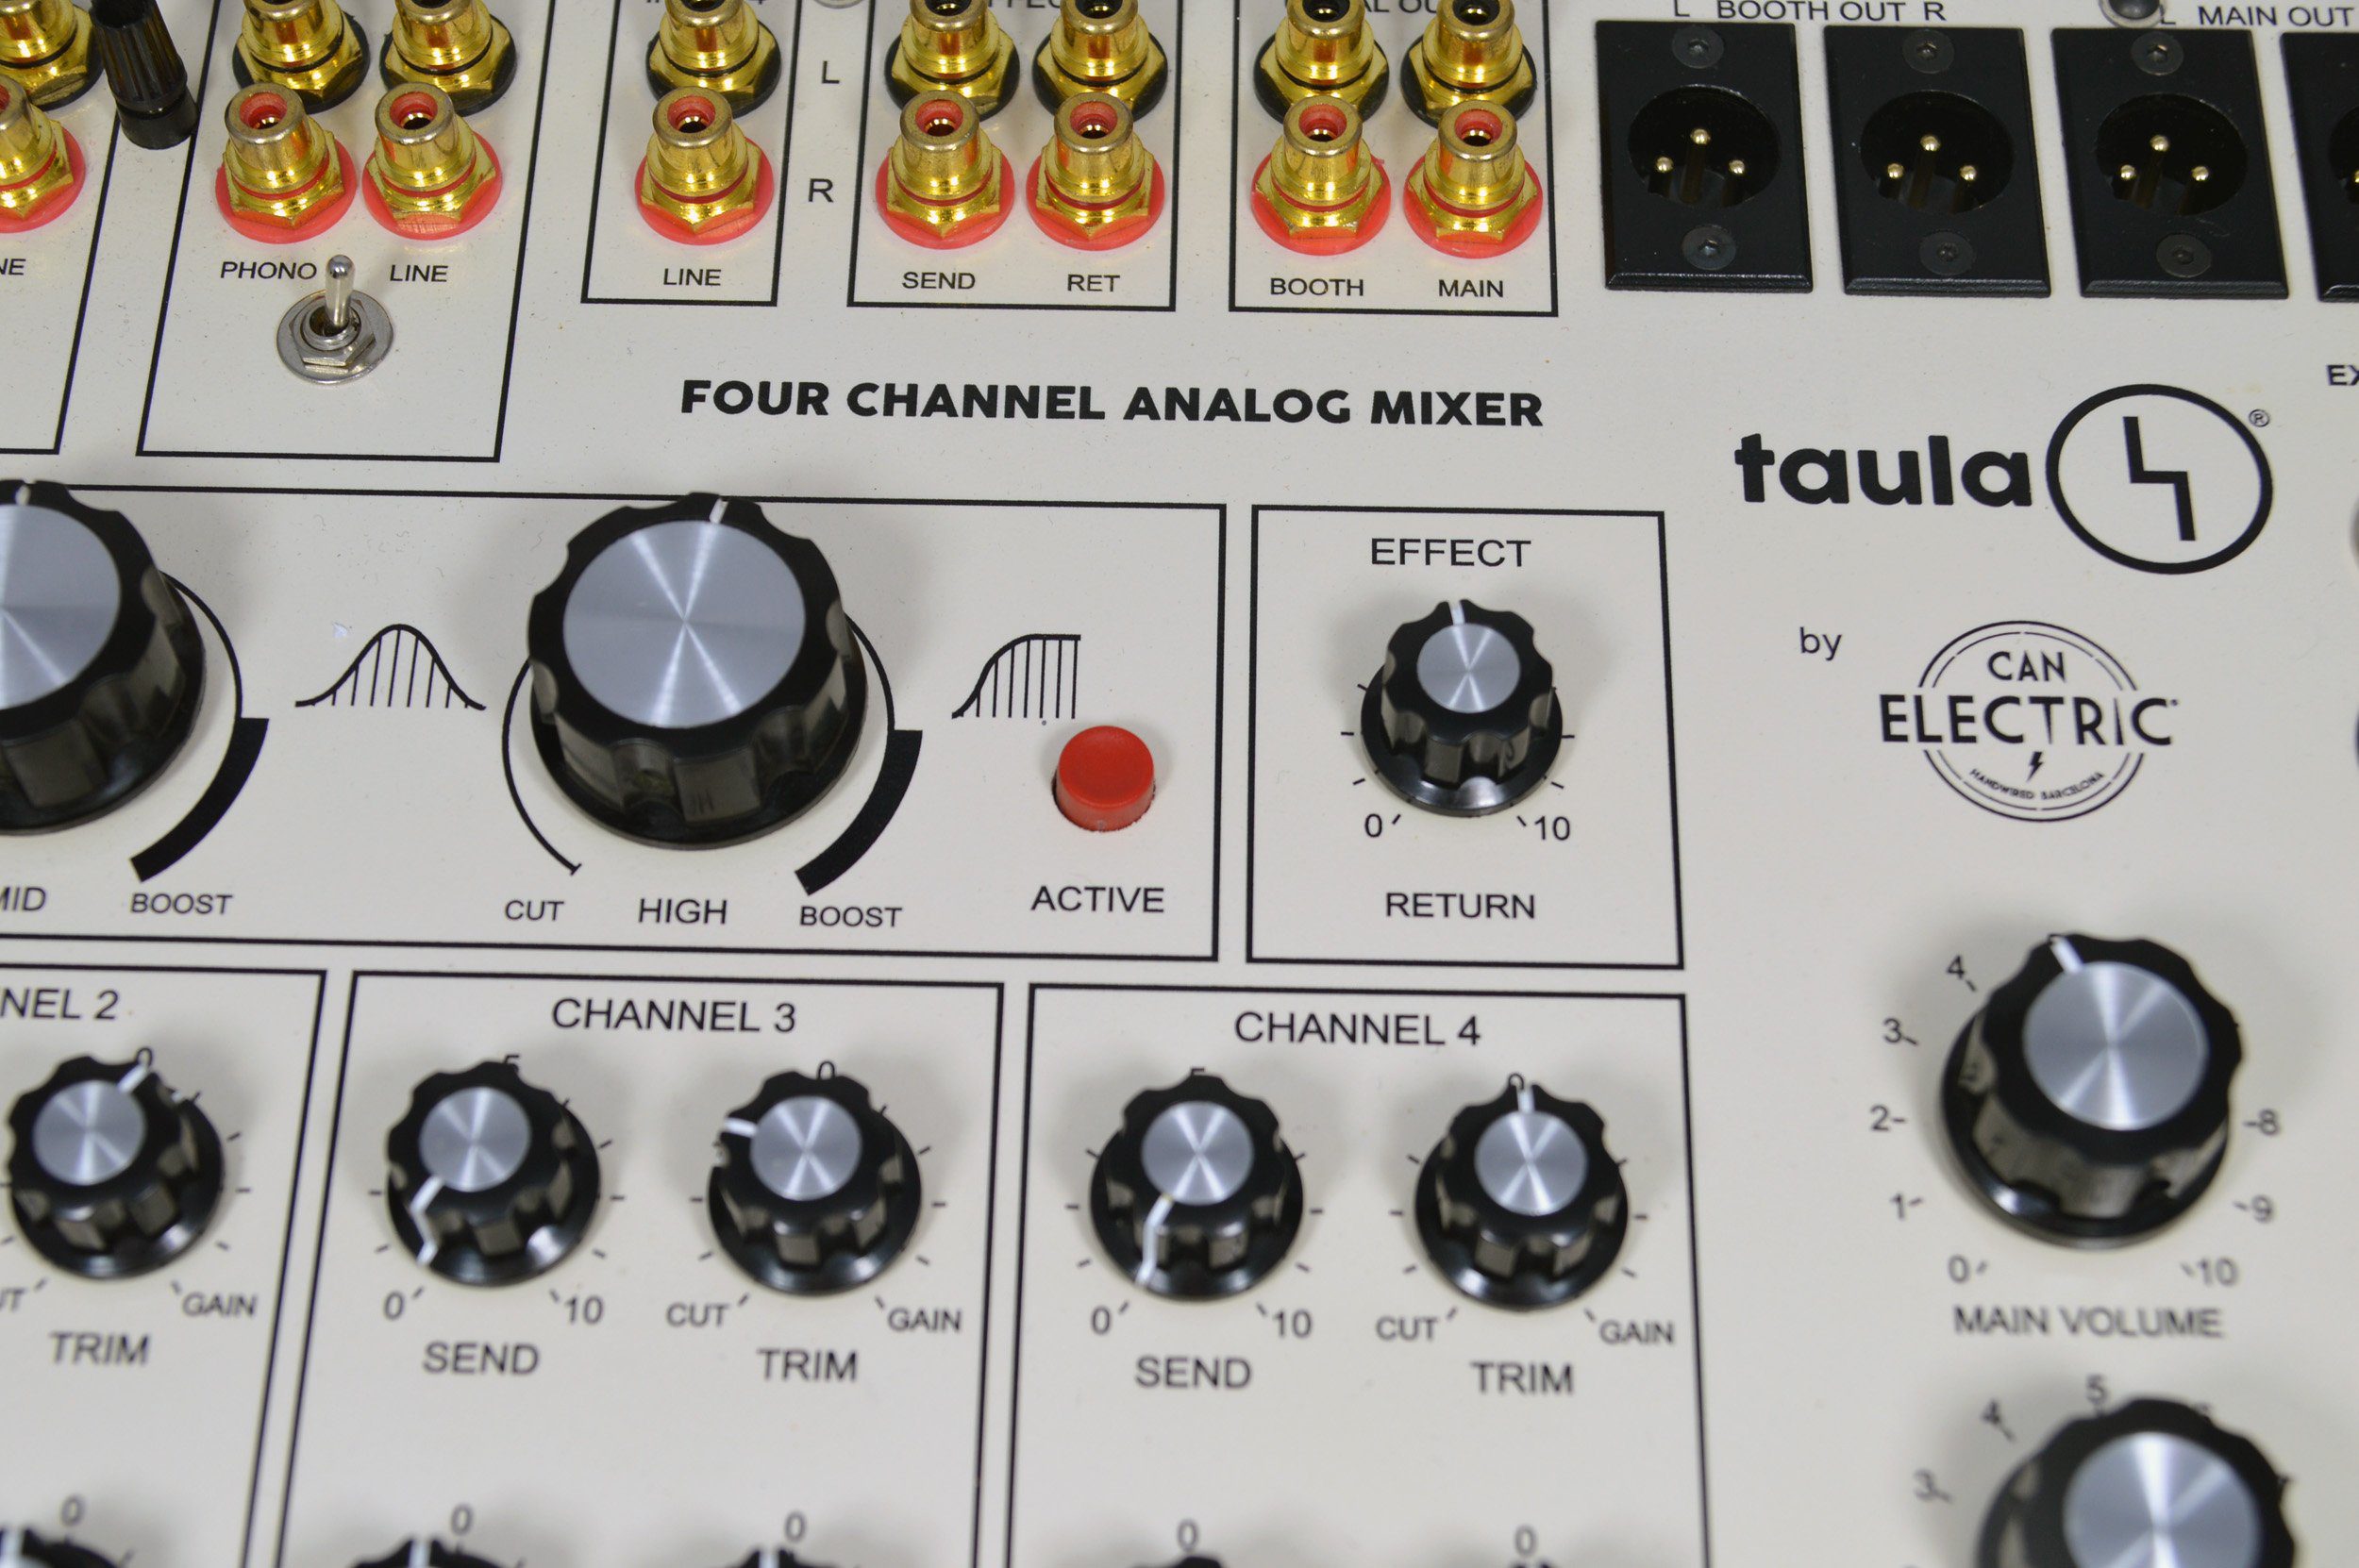 Test: Can Electric Taula 4, Rotary Mixer 